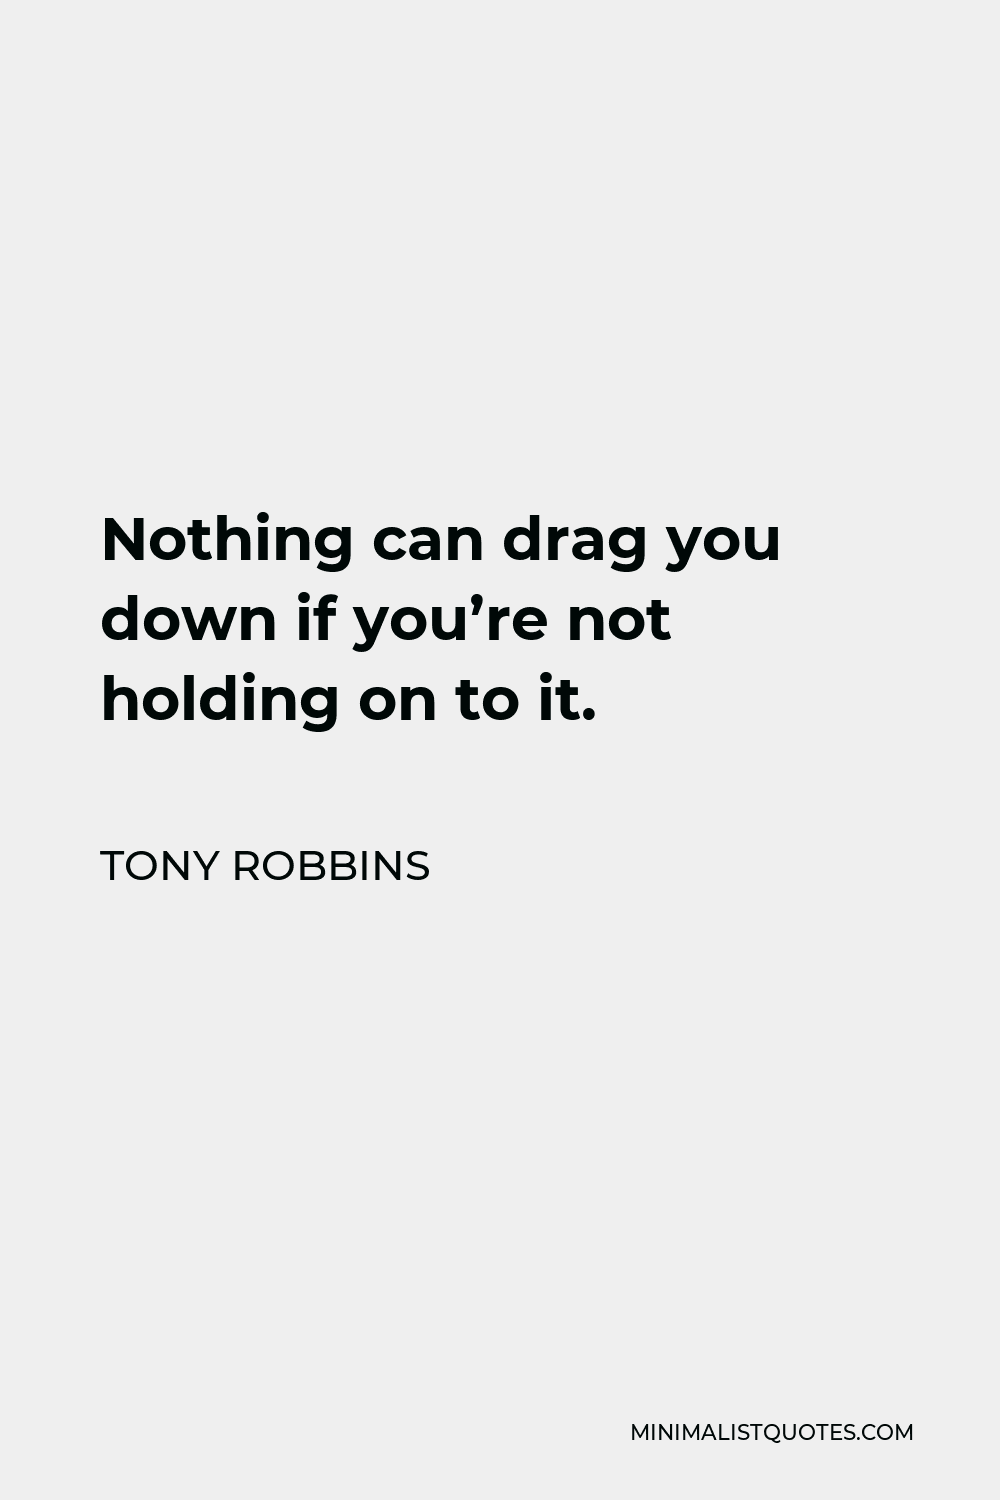 Tony Robbins Quote - Nothing can drag you down if you’re not holding on to it.